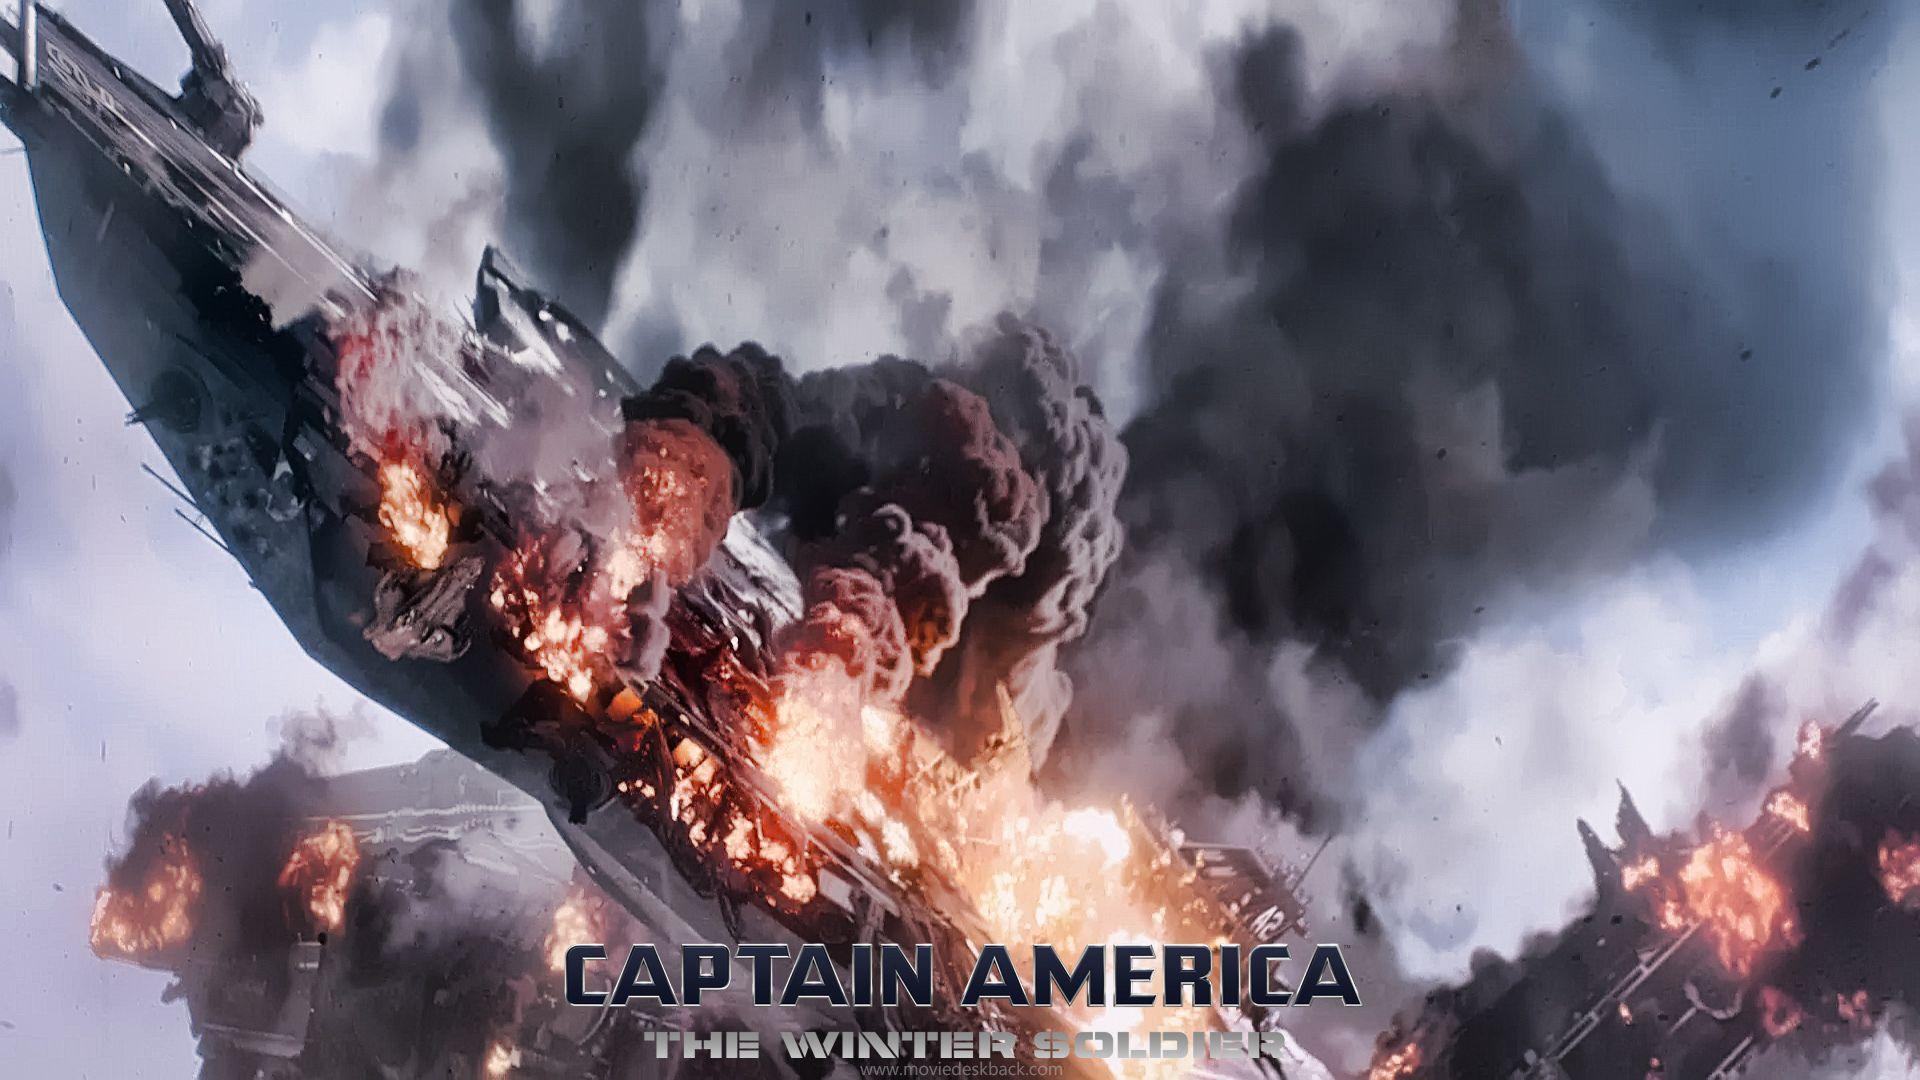 Captain America: The Winter Soldier crash wallpaper and image